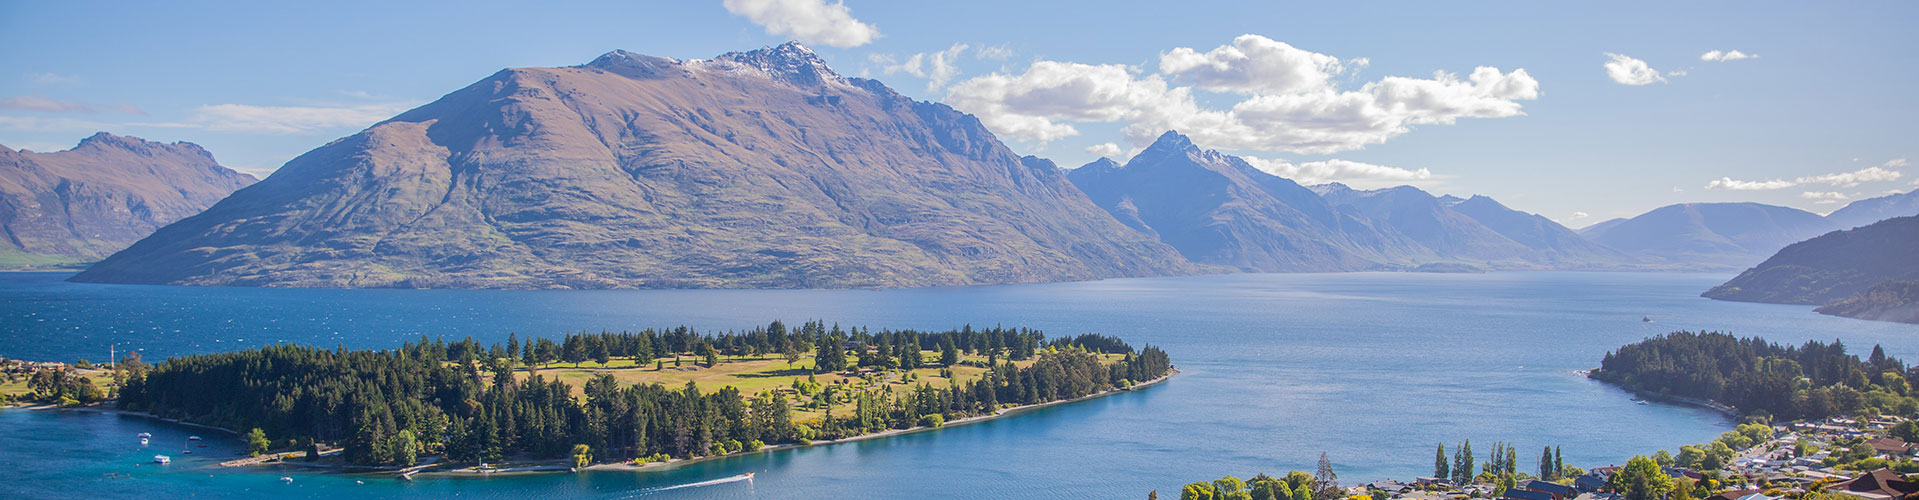 A beautiful lake with an island below snowcapped mountains in New Zealand.